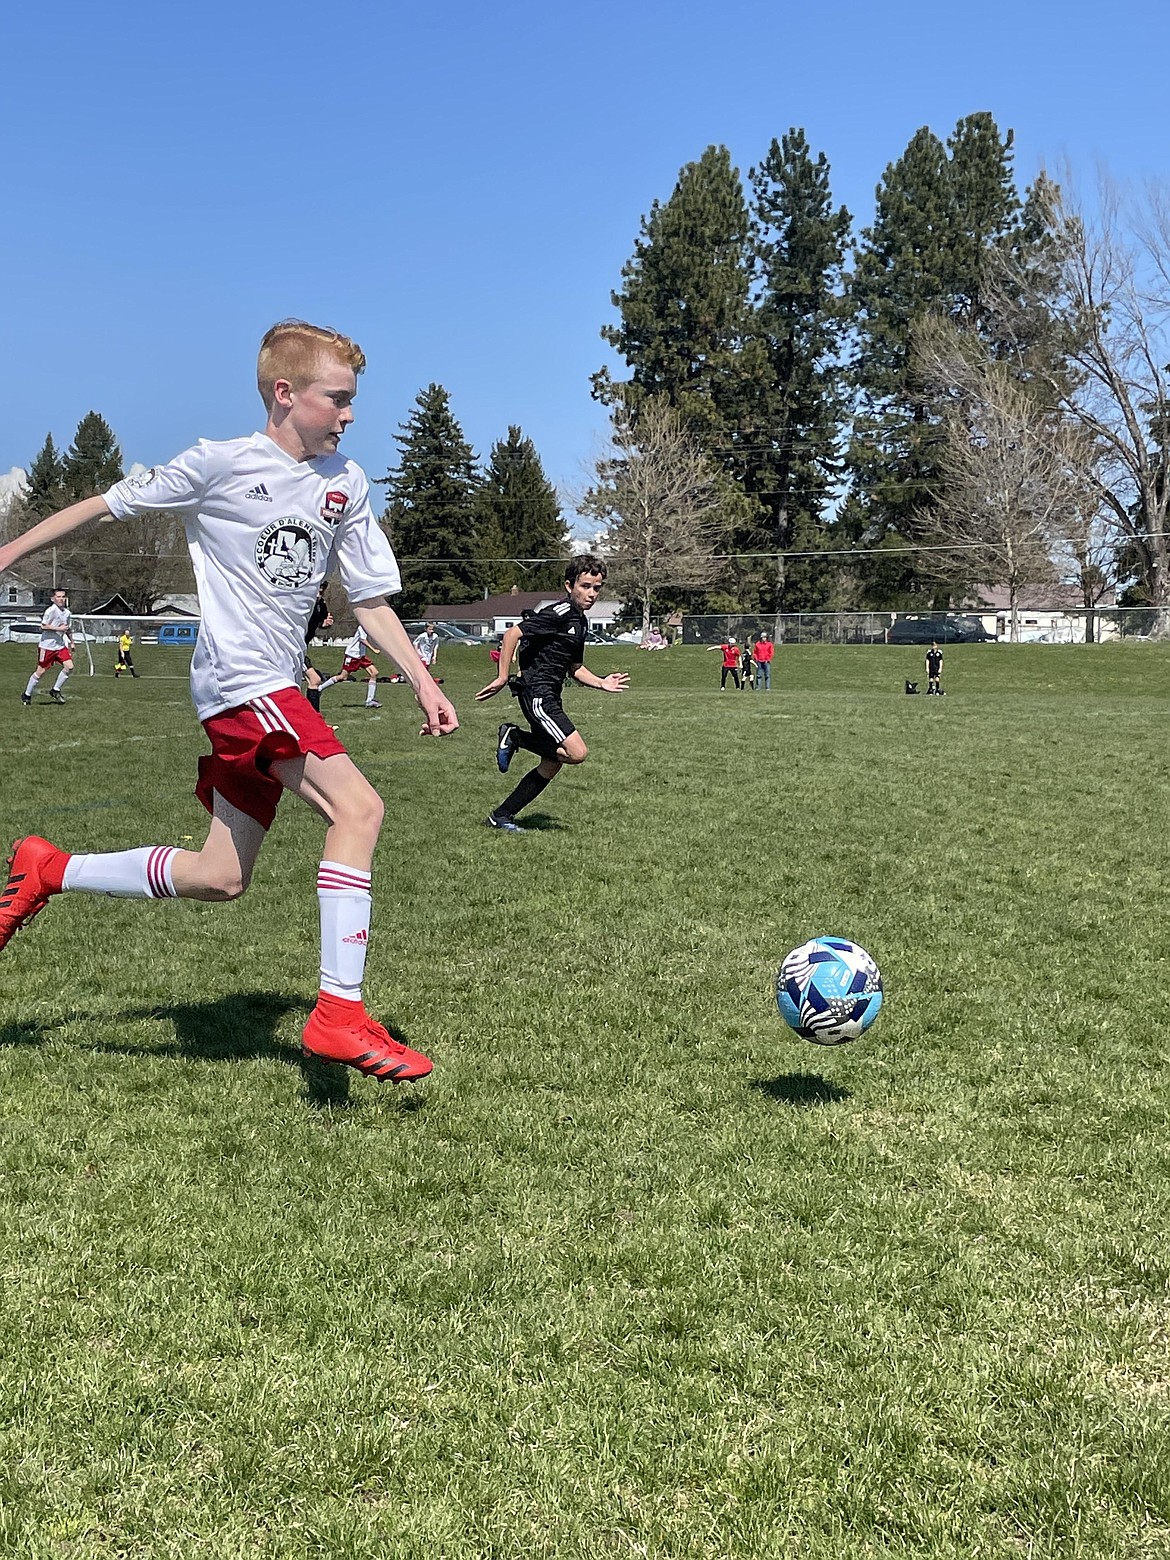 Photo by ABBY FREMOUW
On Sunday, the Timbers North FC 10 Boys White soccer team tied 1-1 with the Cheney Storm FC 09/10 at Canfield Middle School. Mason Cramer scored for the Timbers, and Kellen Anderson was in goal. Pictured above is Luke Nagle of the Timbers.